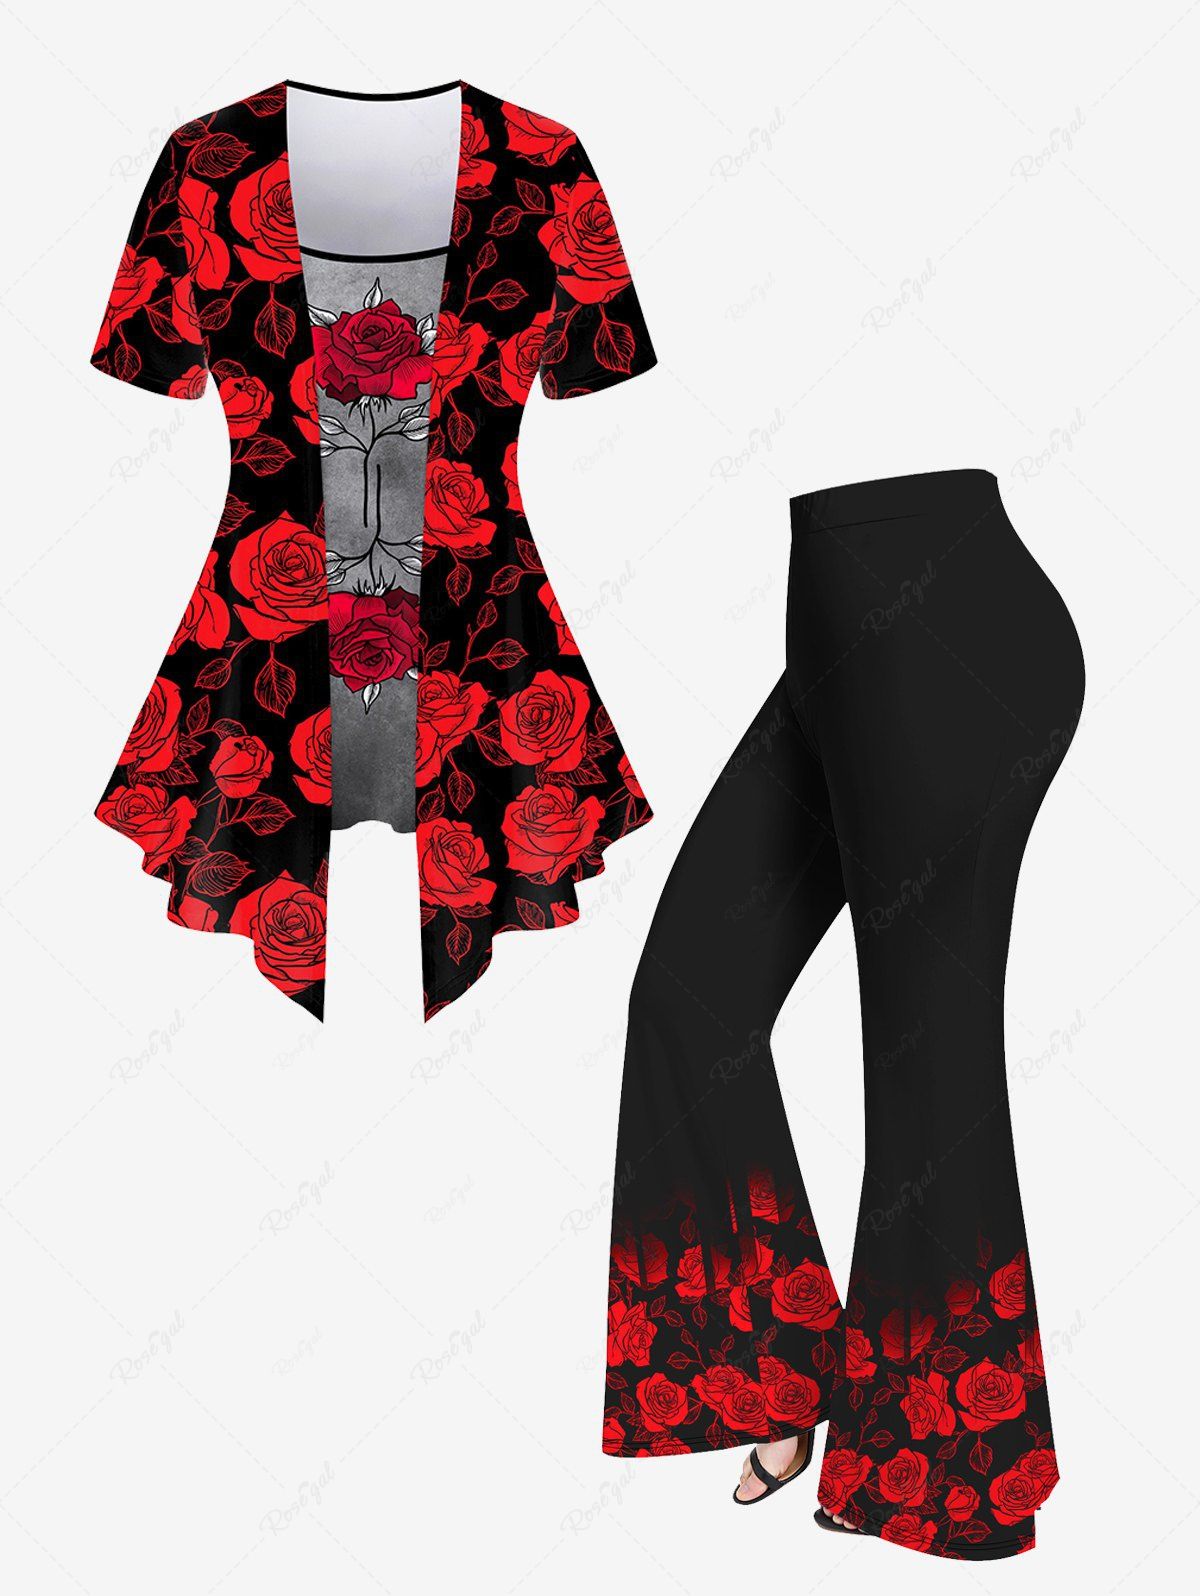 Trendy Flower Printed 2 In 1 T-shirt and Flare Pants Plus Size Matching Set  